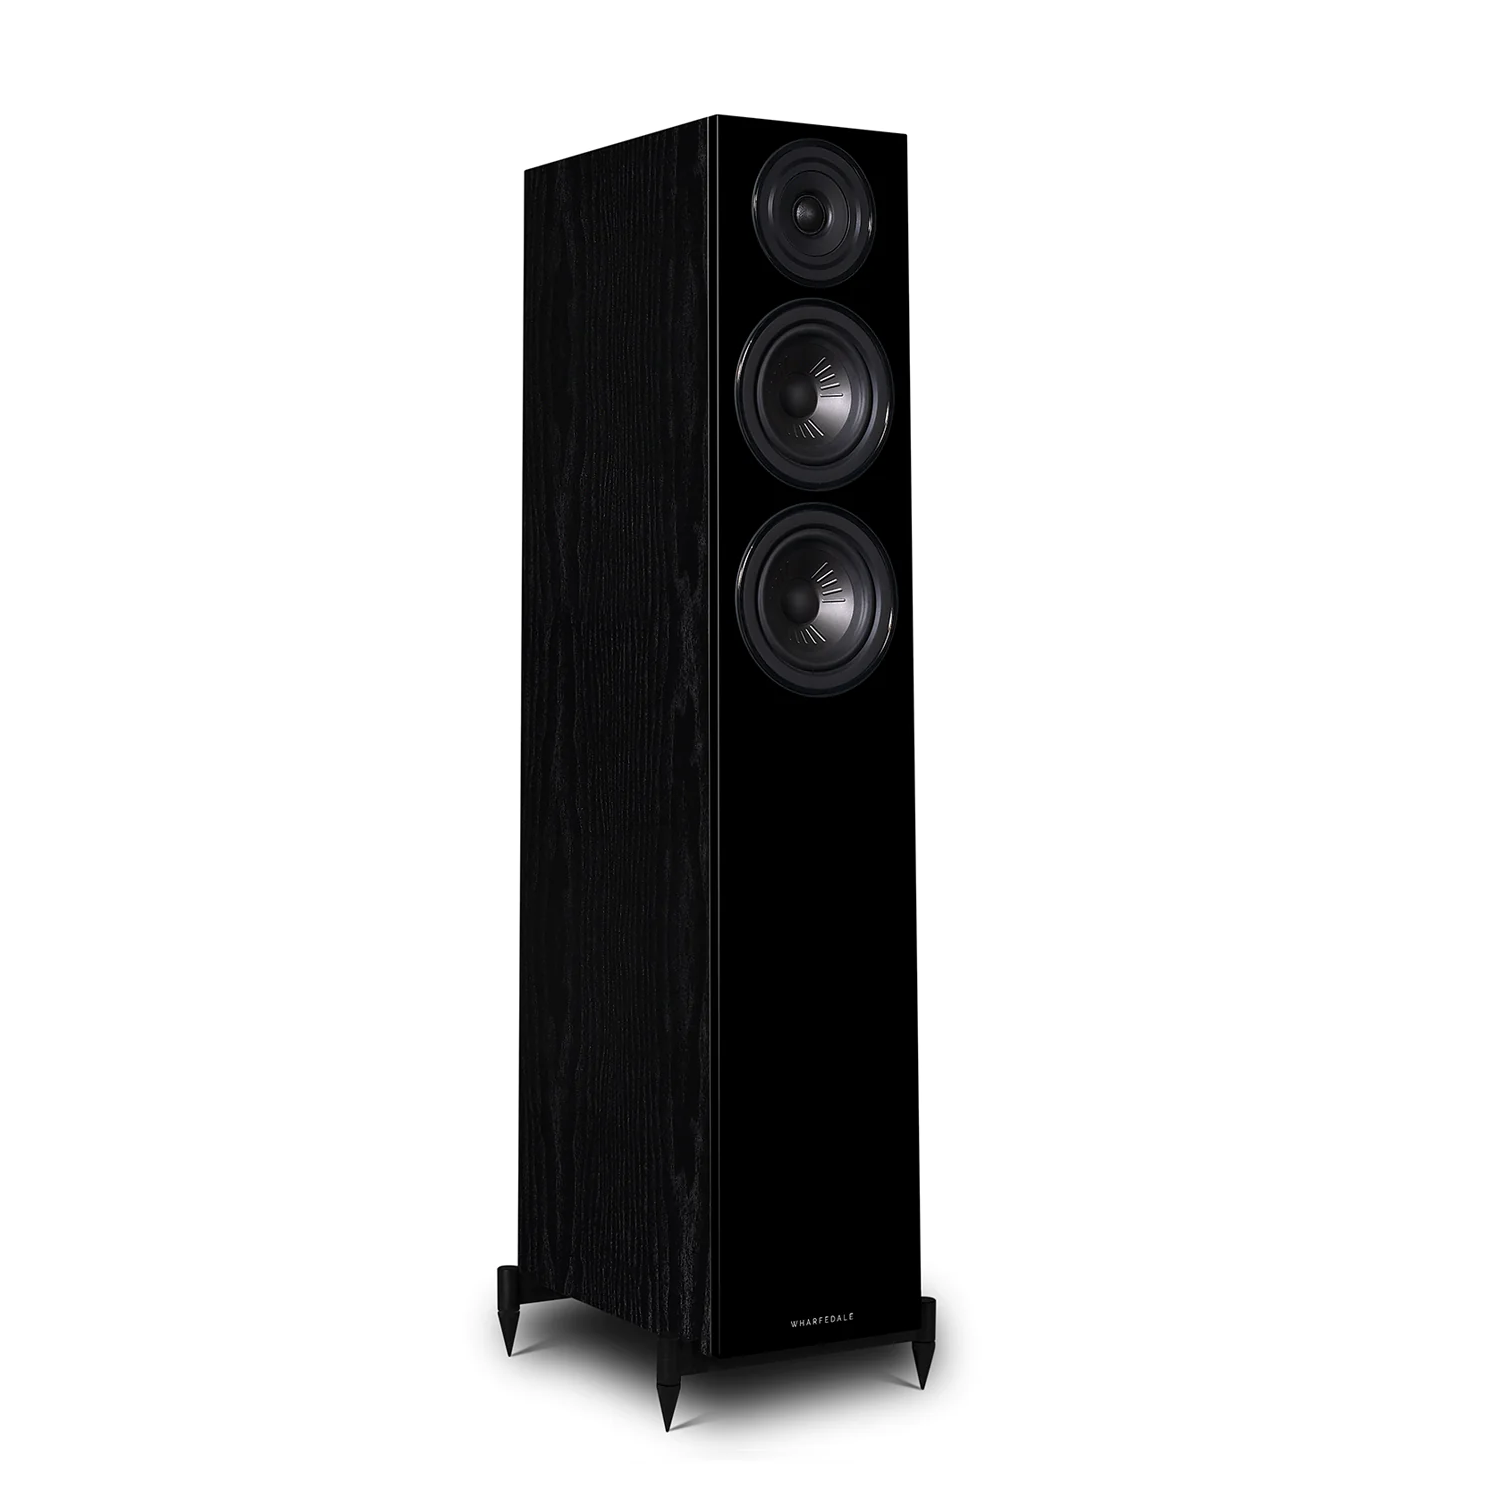 The more compact of the Wharfedale DIAMOND 12 series floorstanding options, the DIAMOND 12.3 loses none of the accuracy and musicality of the standmount (bookshelf) options. With enhanced presence and power, the DIAMOND 12.3 is refined and the perfect, affordable floorstanding speaker for 2-channel hi-fi systems, or as the front pair of a seriously impressive home theatre system. 